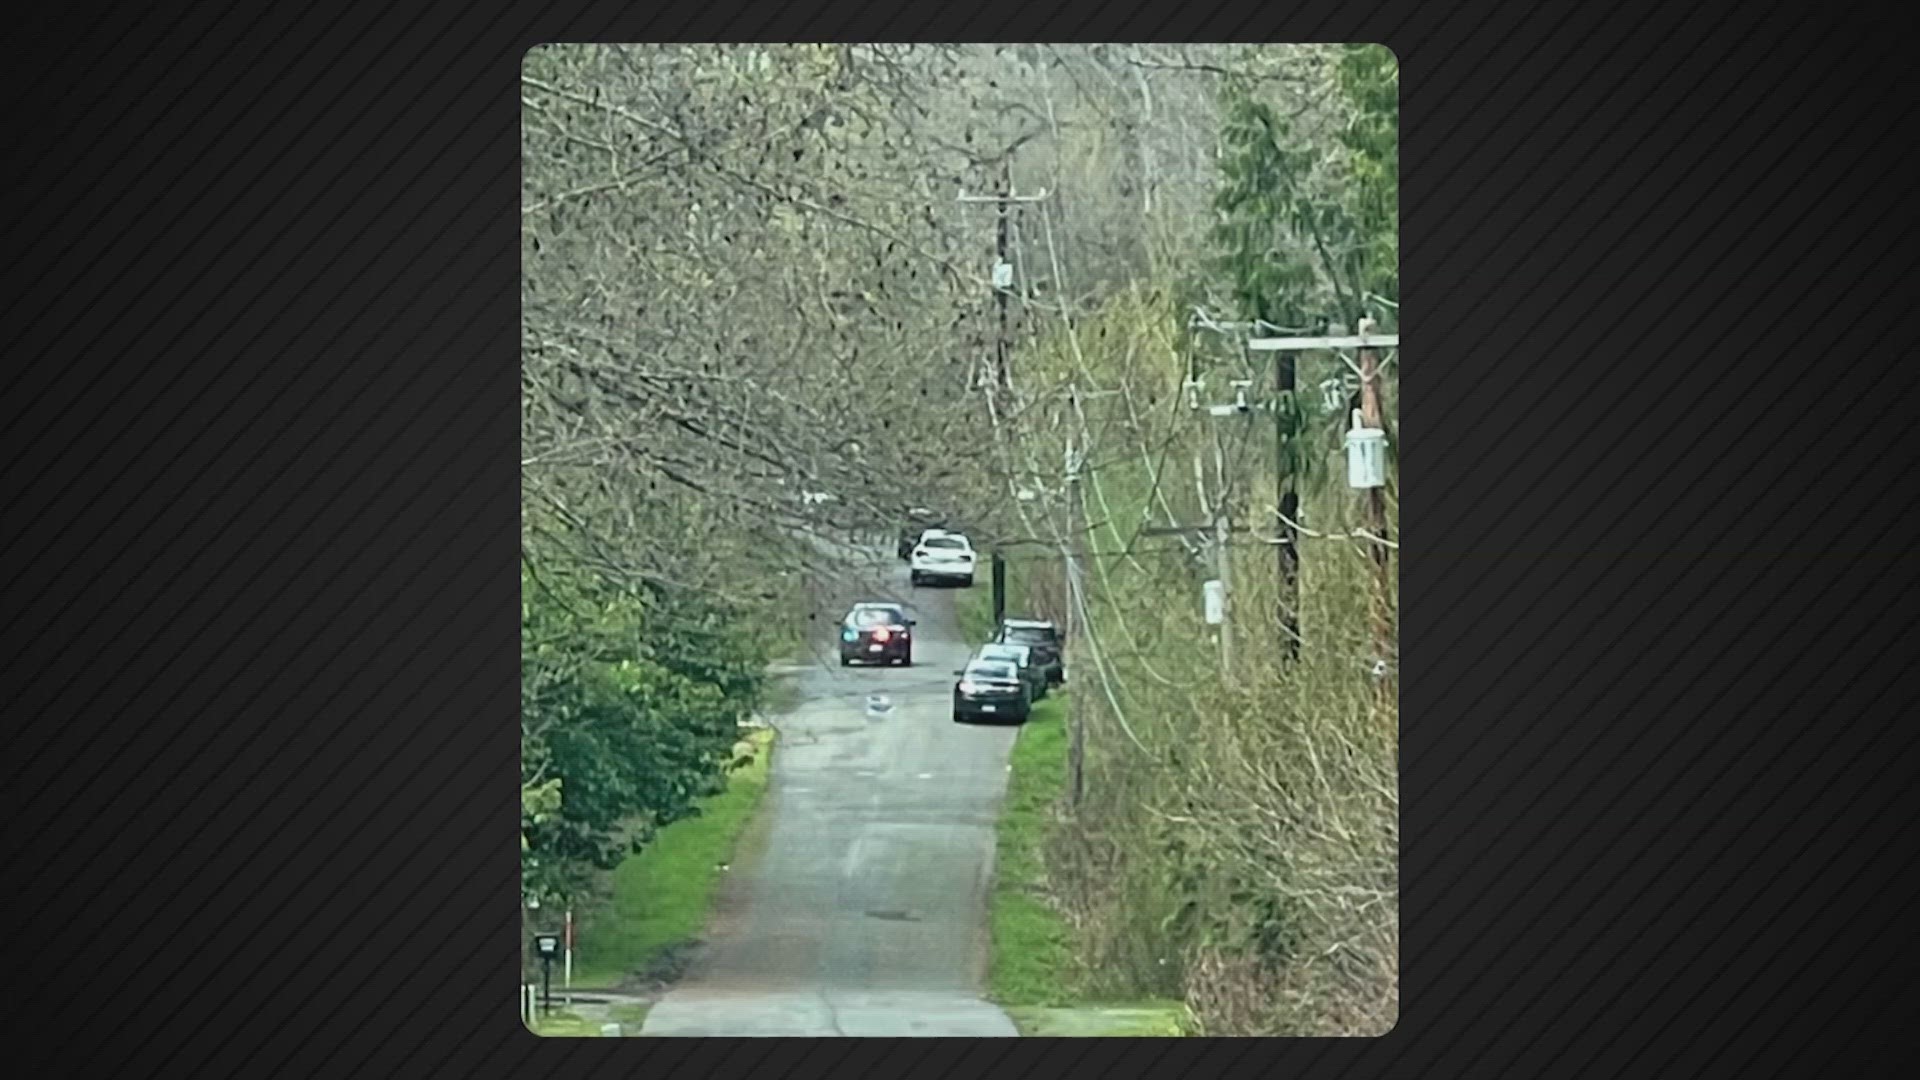 Detectives investigating the disappearance of Leticia Martinez discovered a body in Renton Tuesday afternoon as part of that investigation, according to police.